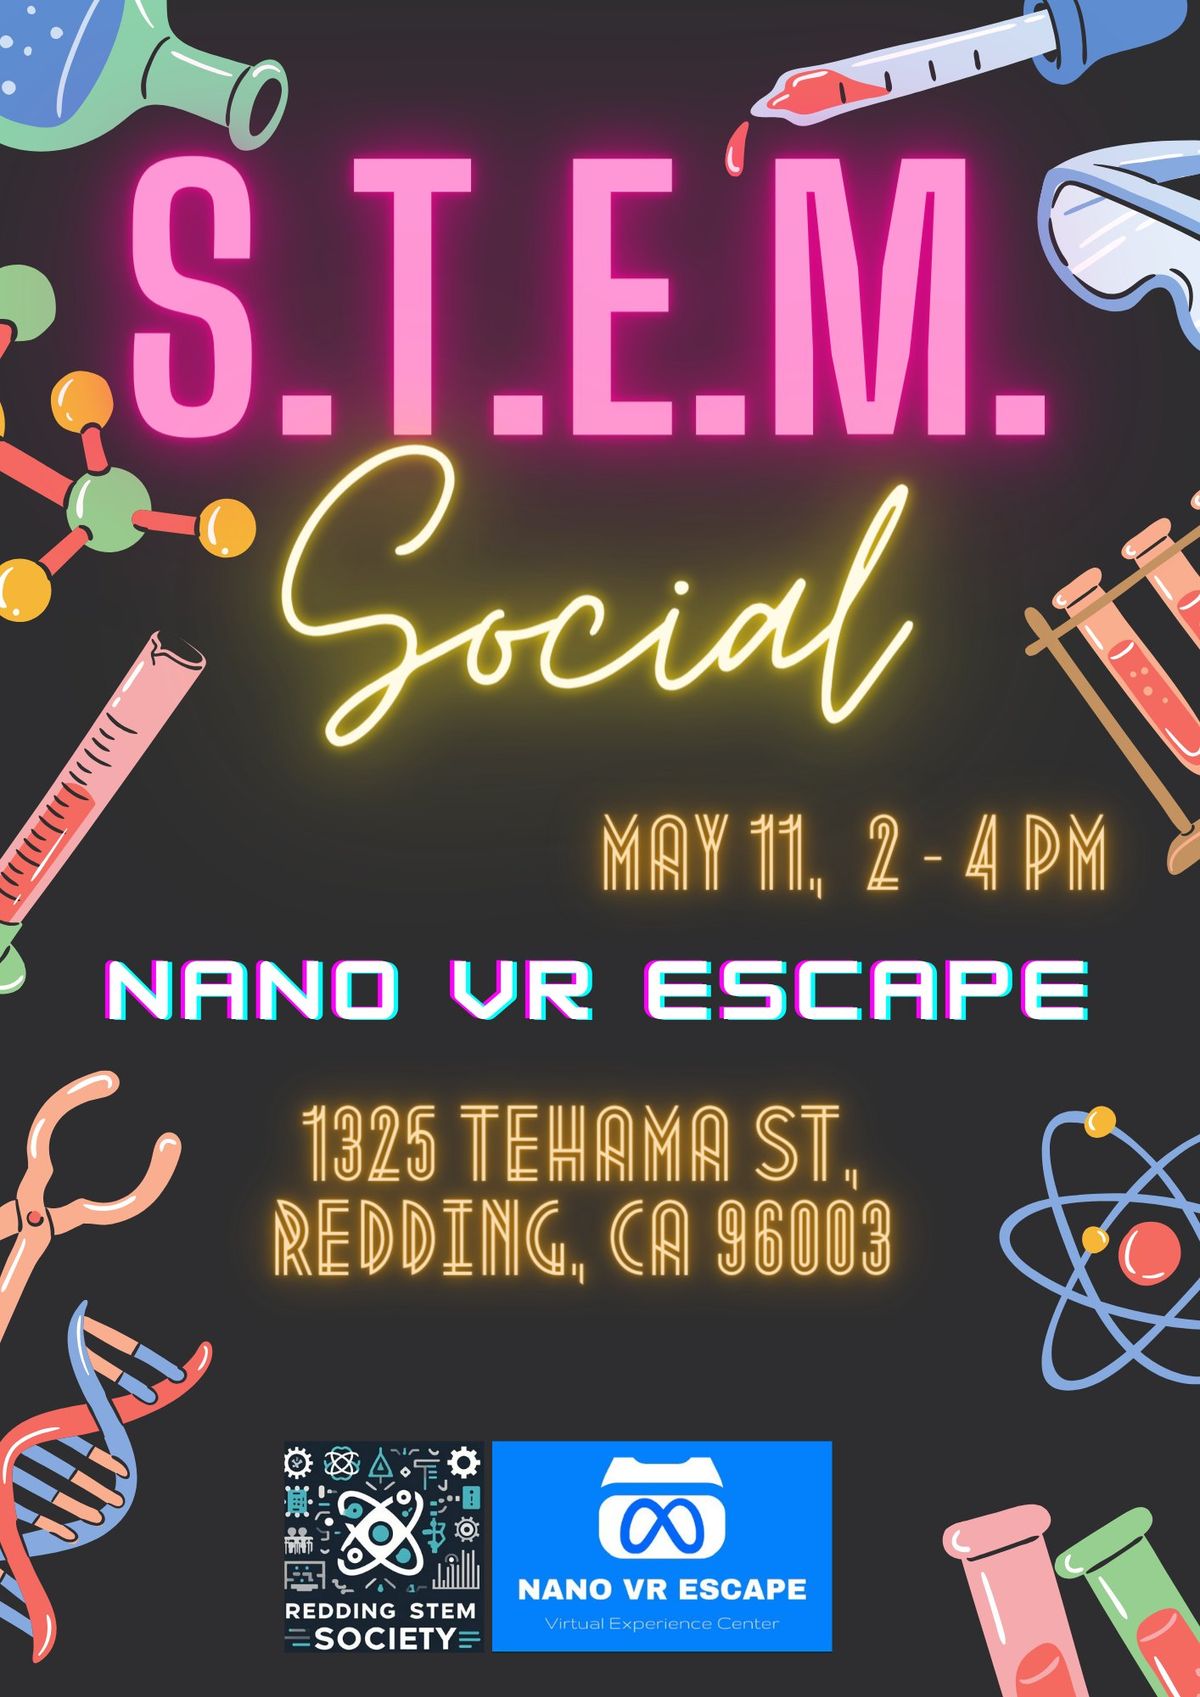 Monthly STEM Social: May 11